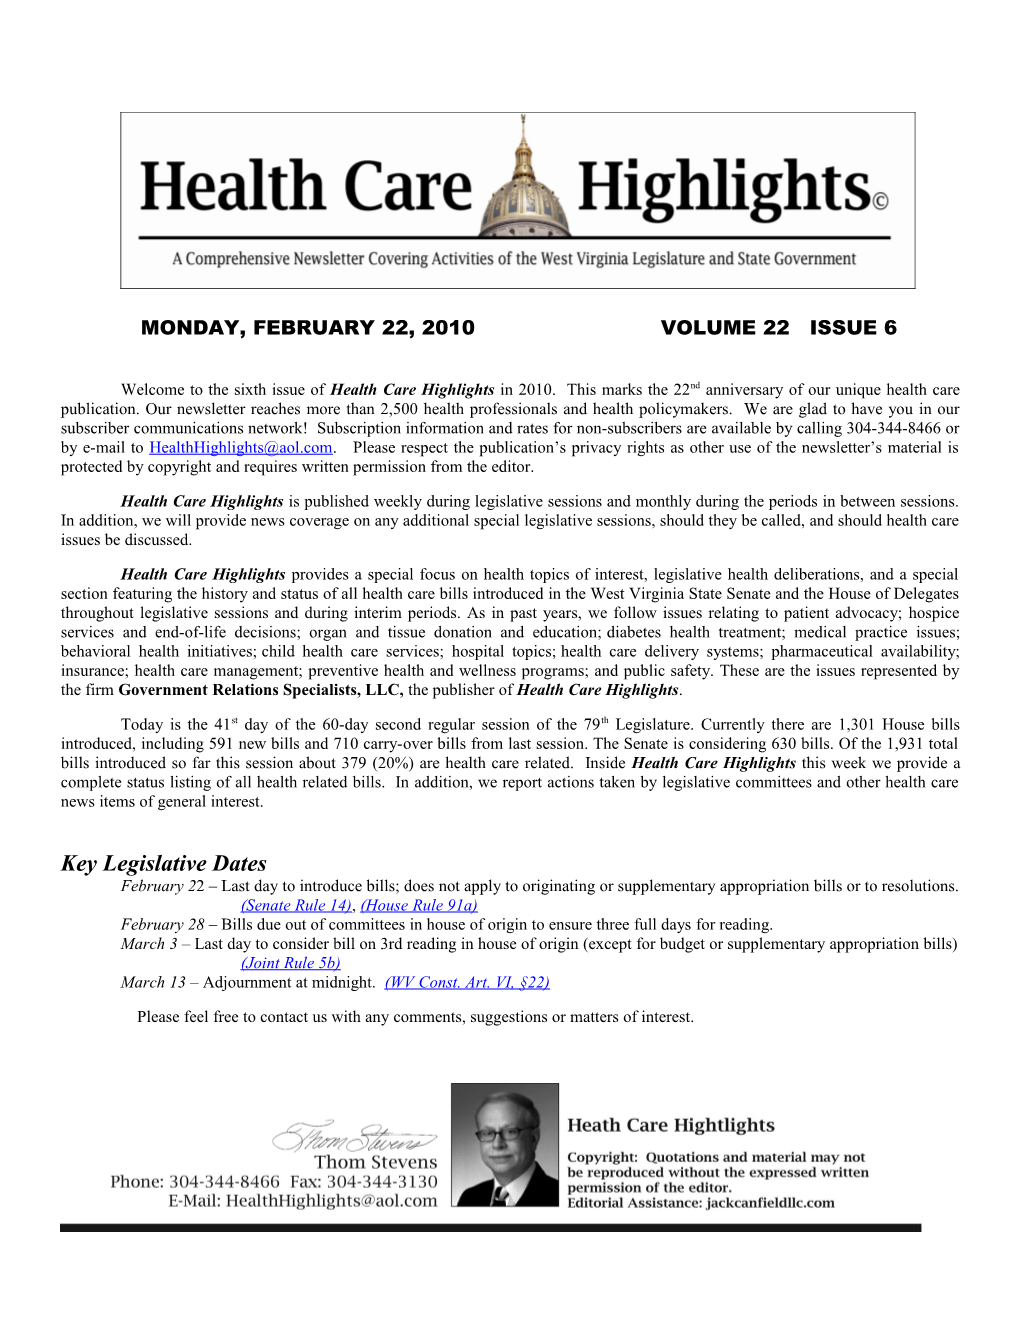 Health Care Highlights Is Published Weekly During Legislative Sessions and Monthly During